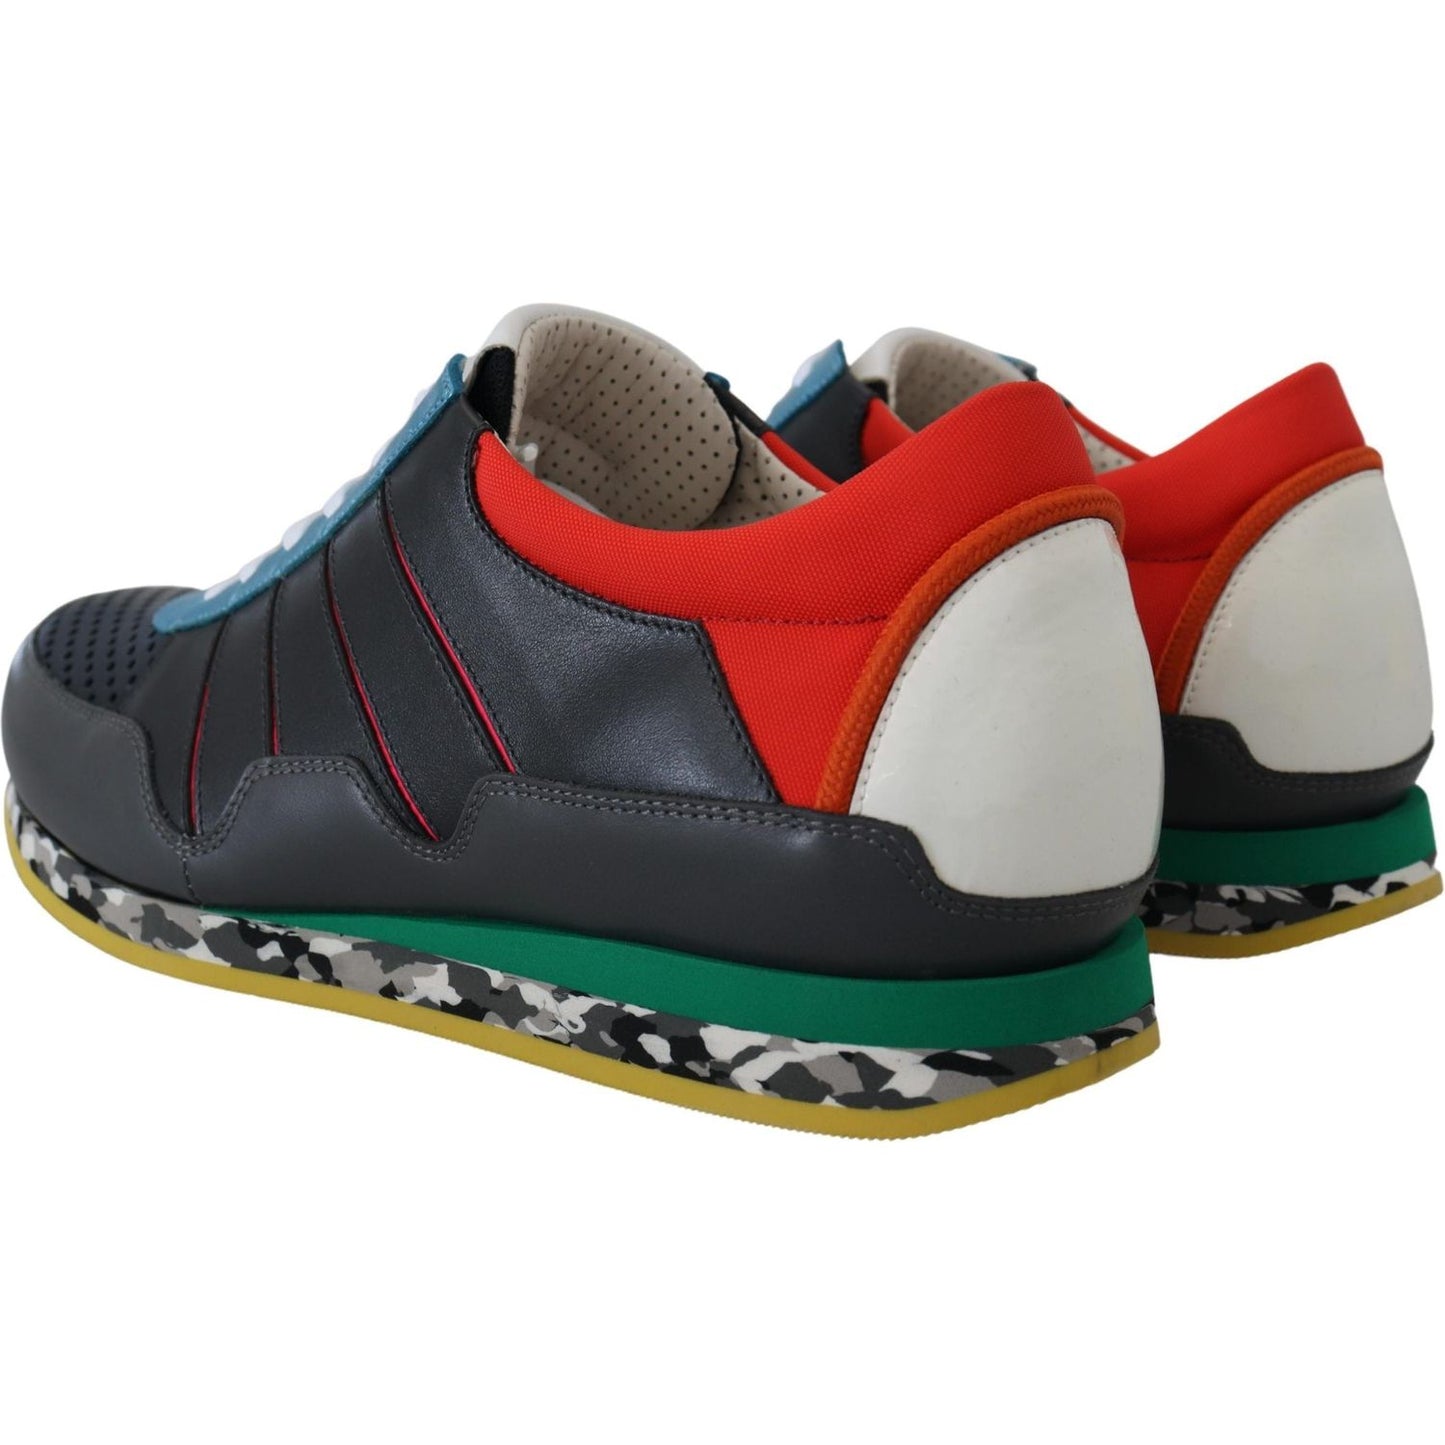 Dolce & Gabbana Multicolor Leather-Blend Low Top Sneakers multicolor-sport-low-top-shoes-sneakers